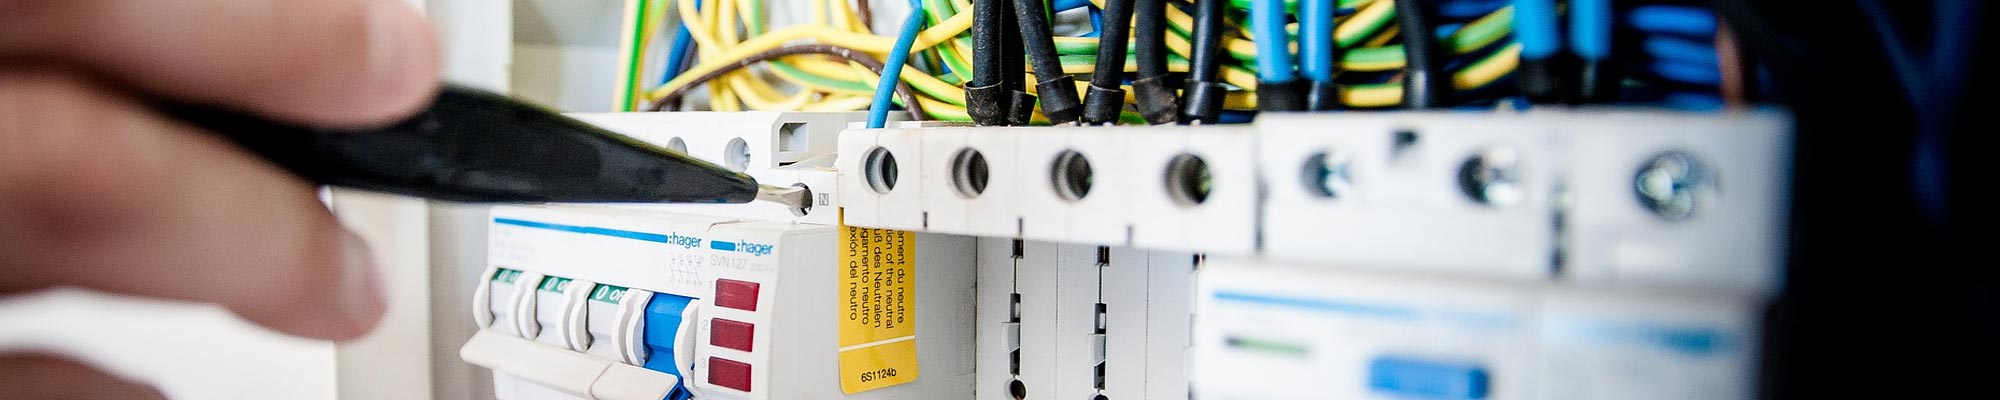 Landlords Reports - Electricians in Reading